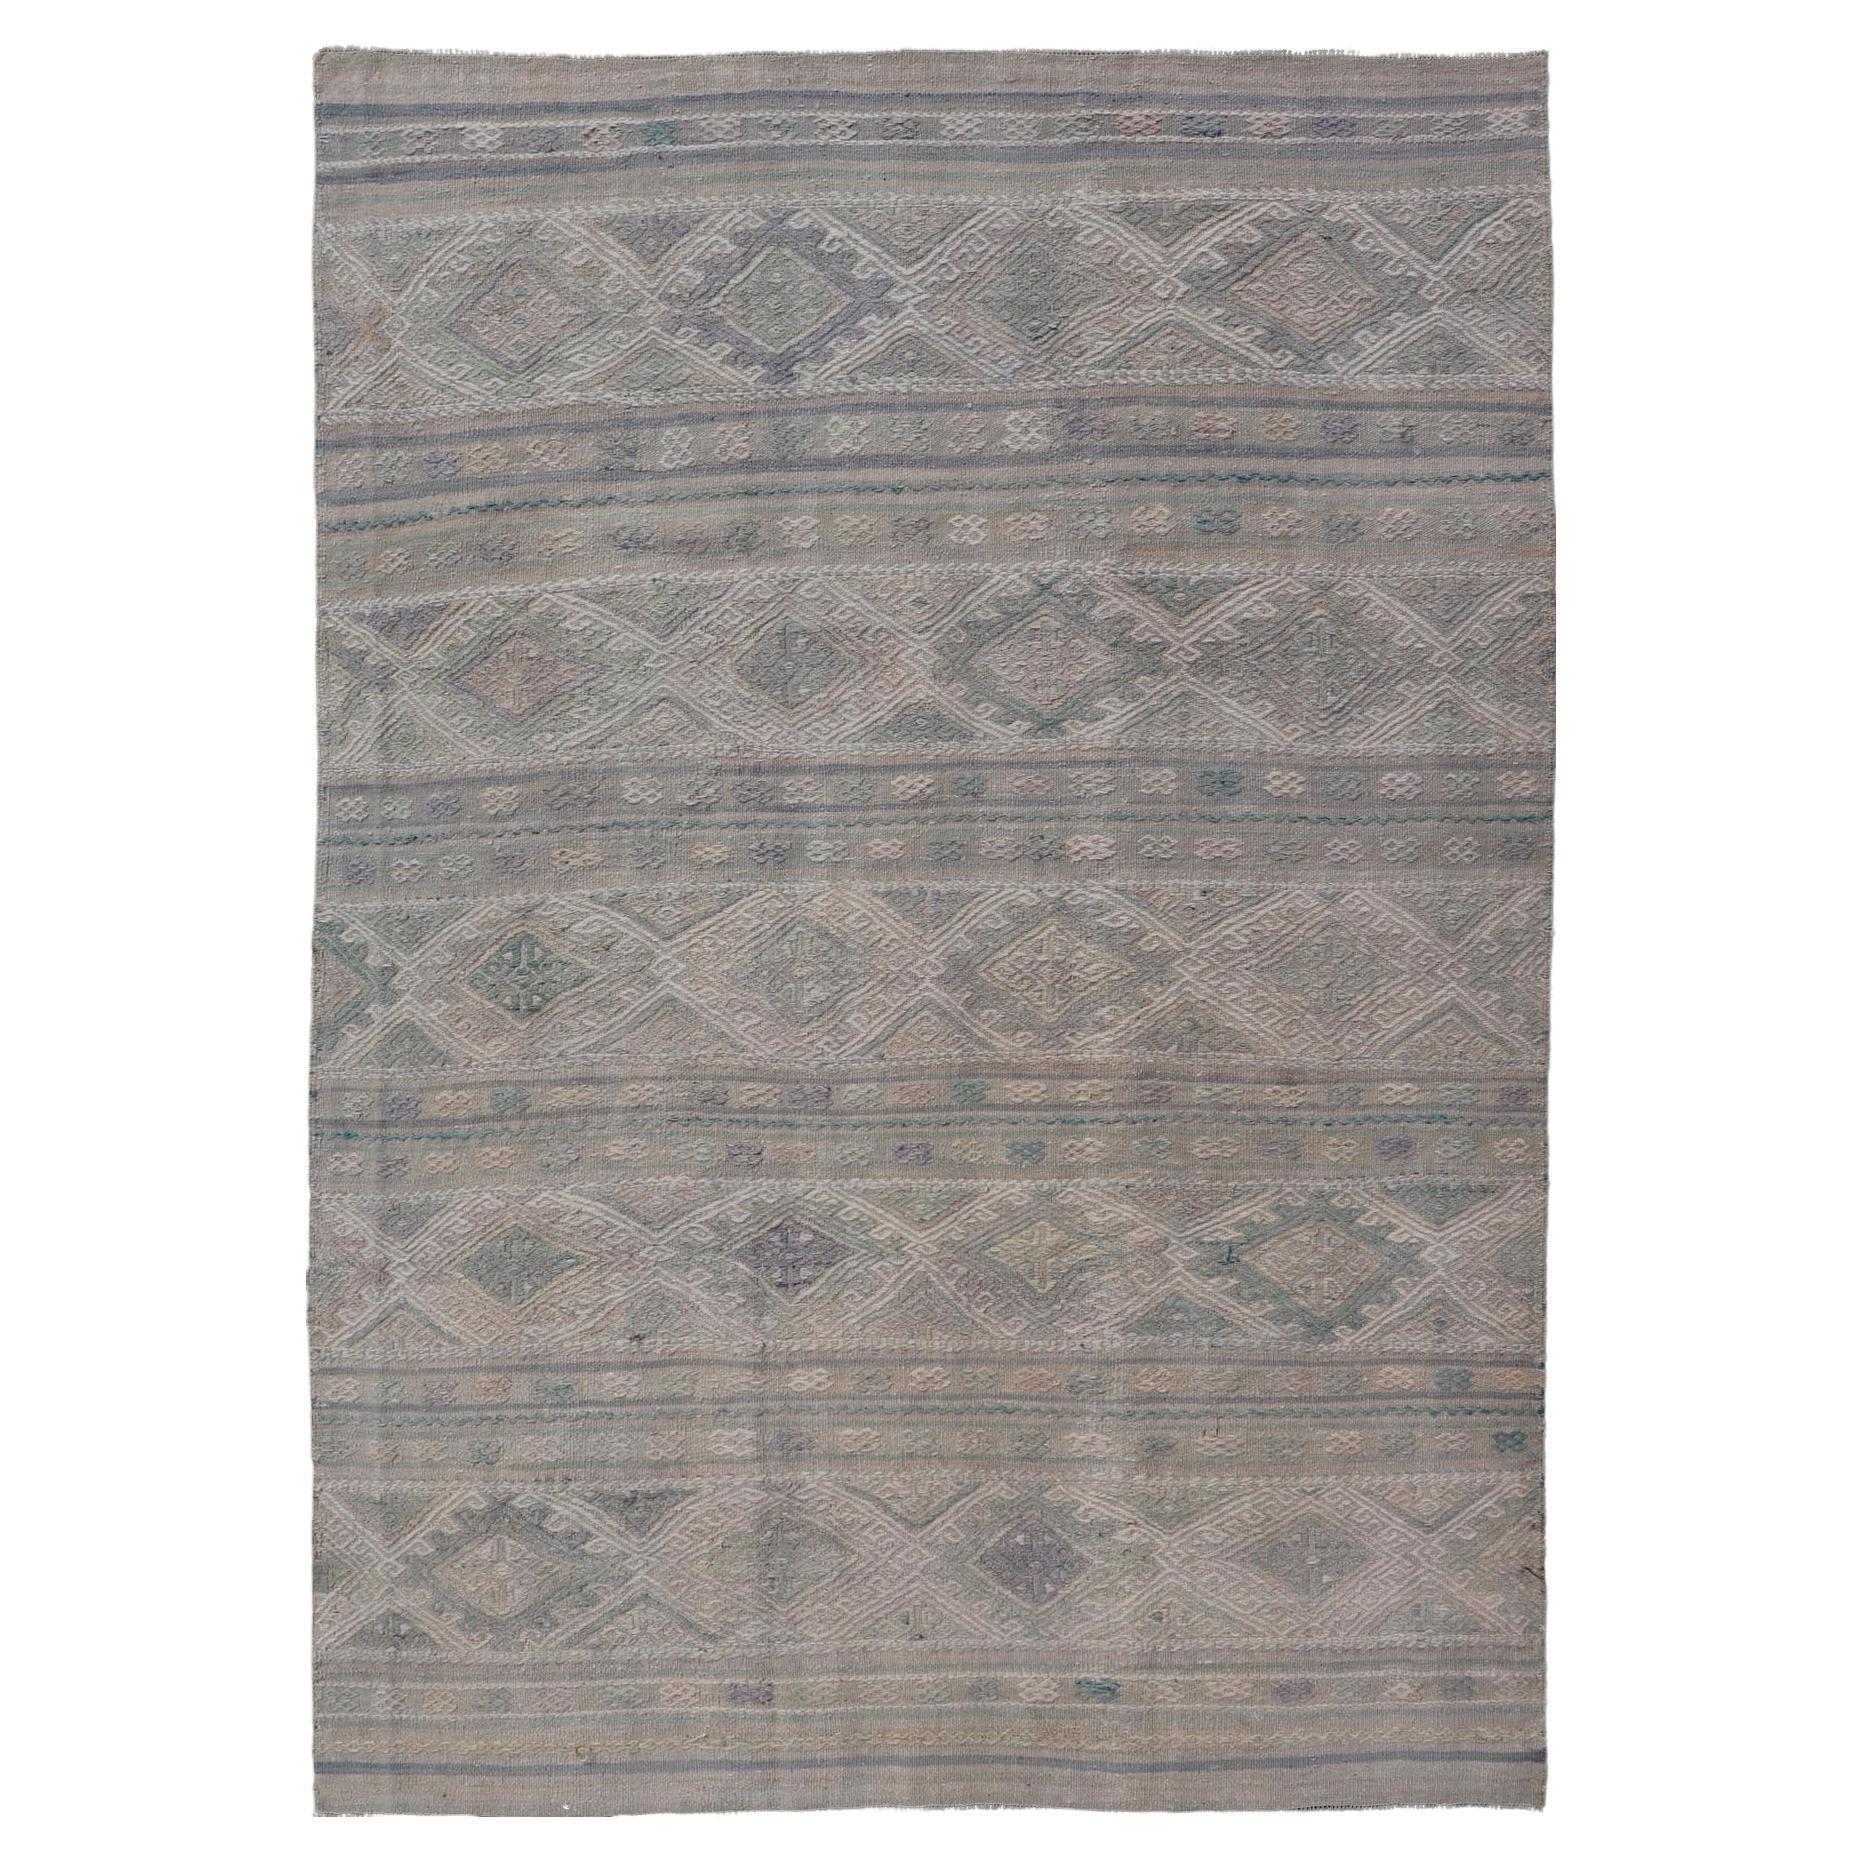 Vintage Turkish Flat-Weave Kilim with Stripes and Embroideries With Gray-Green